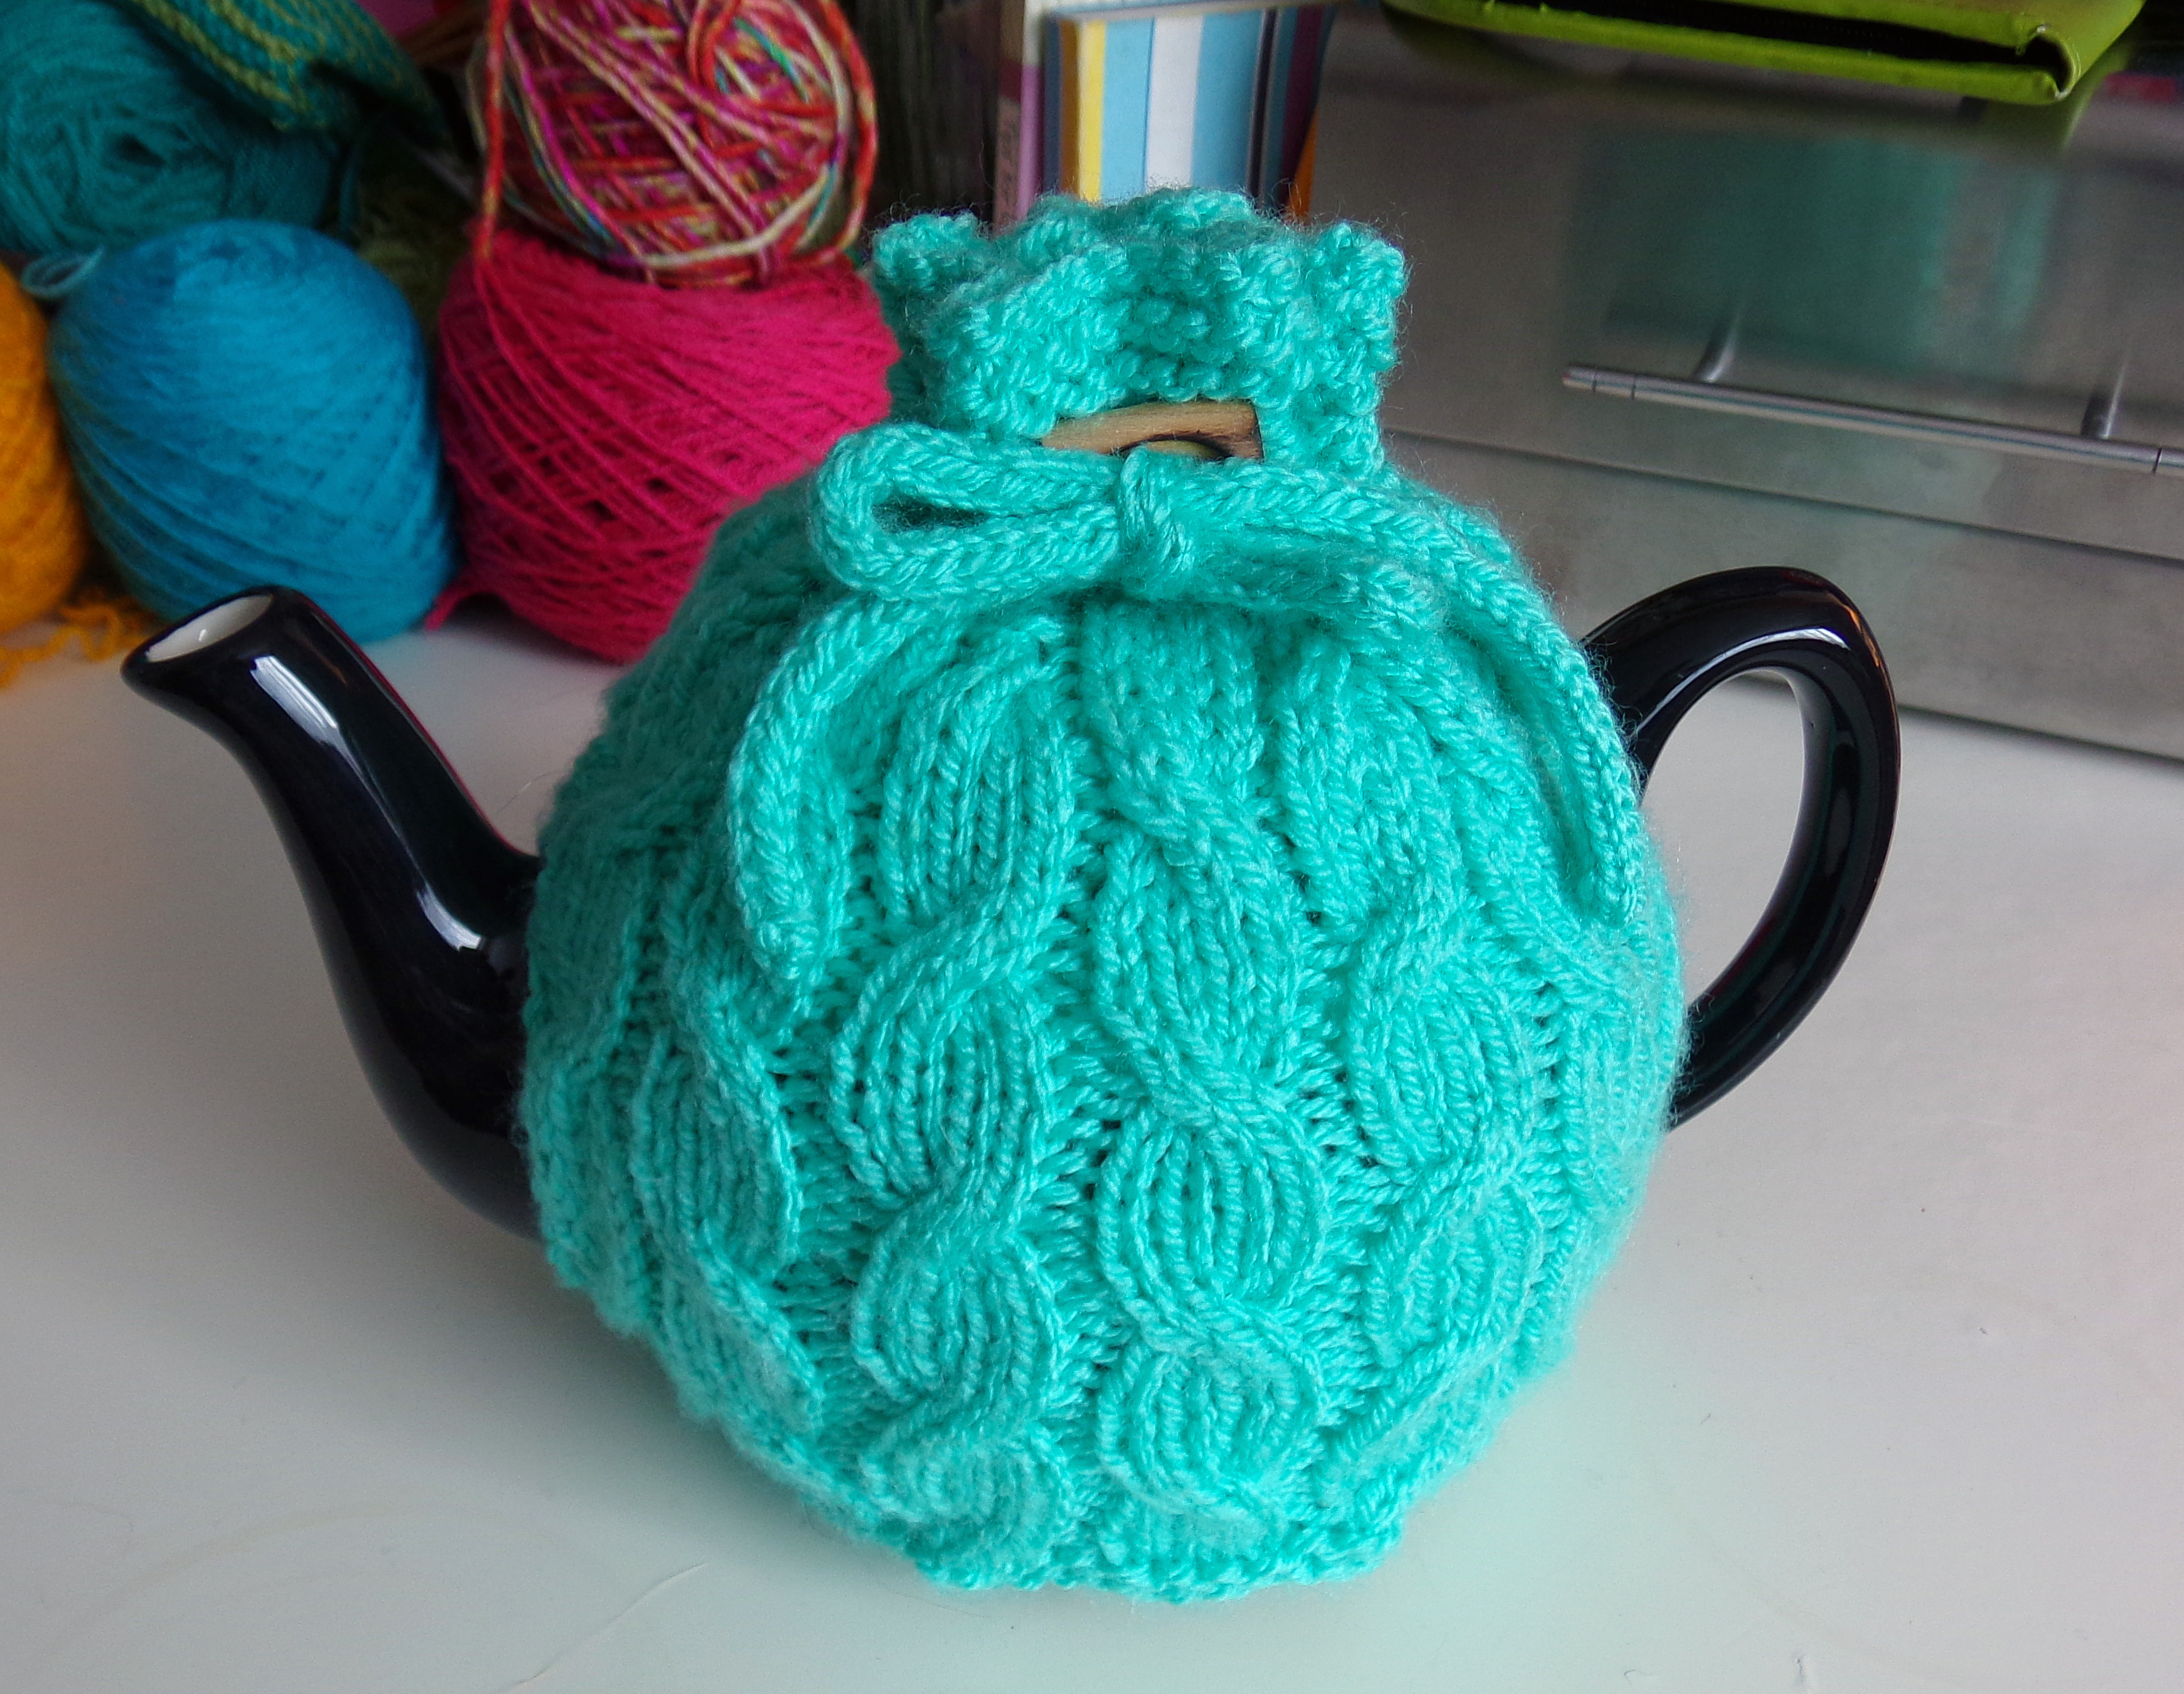 Tea Cosy Patterns To Knit Three Free Tea Cosy Patterns Reviewed Or Why Tea Pots Are Better